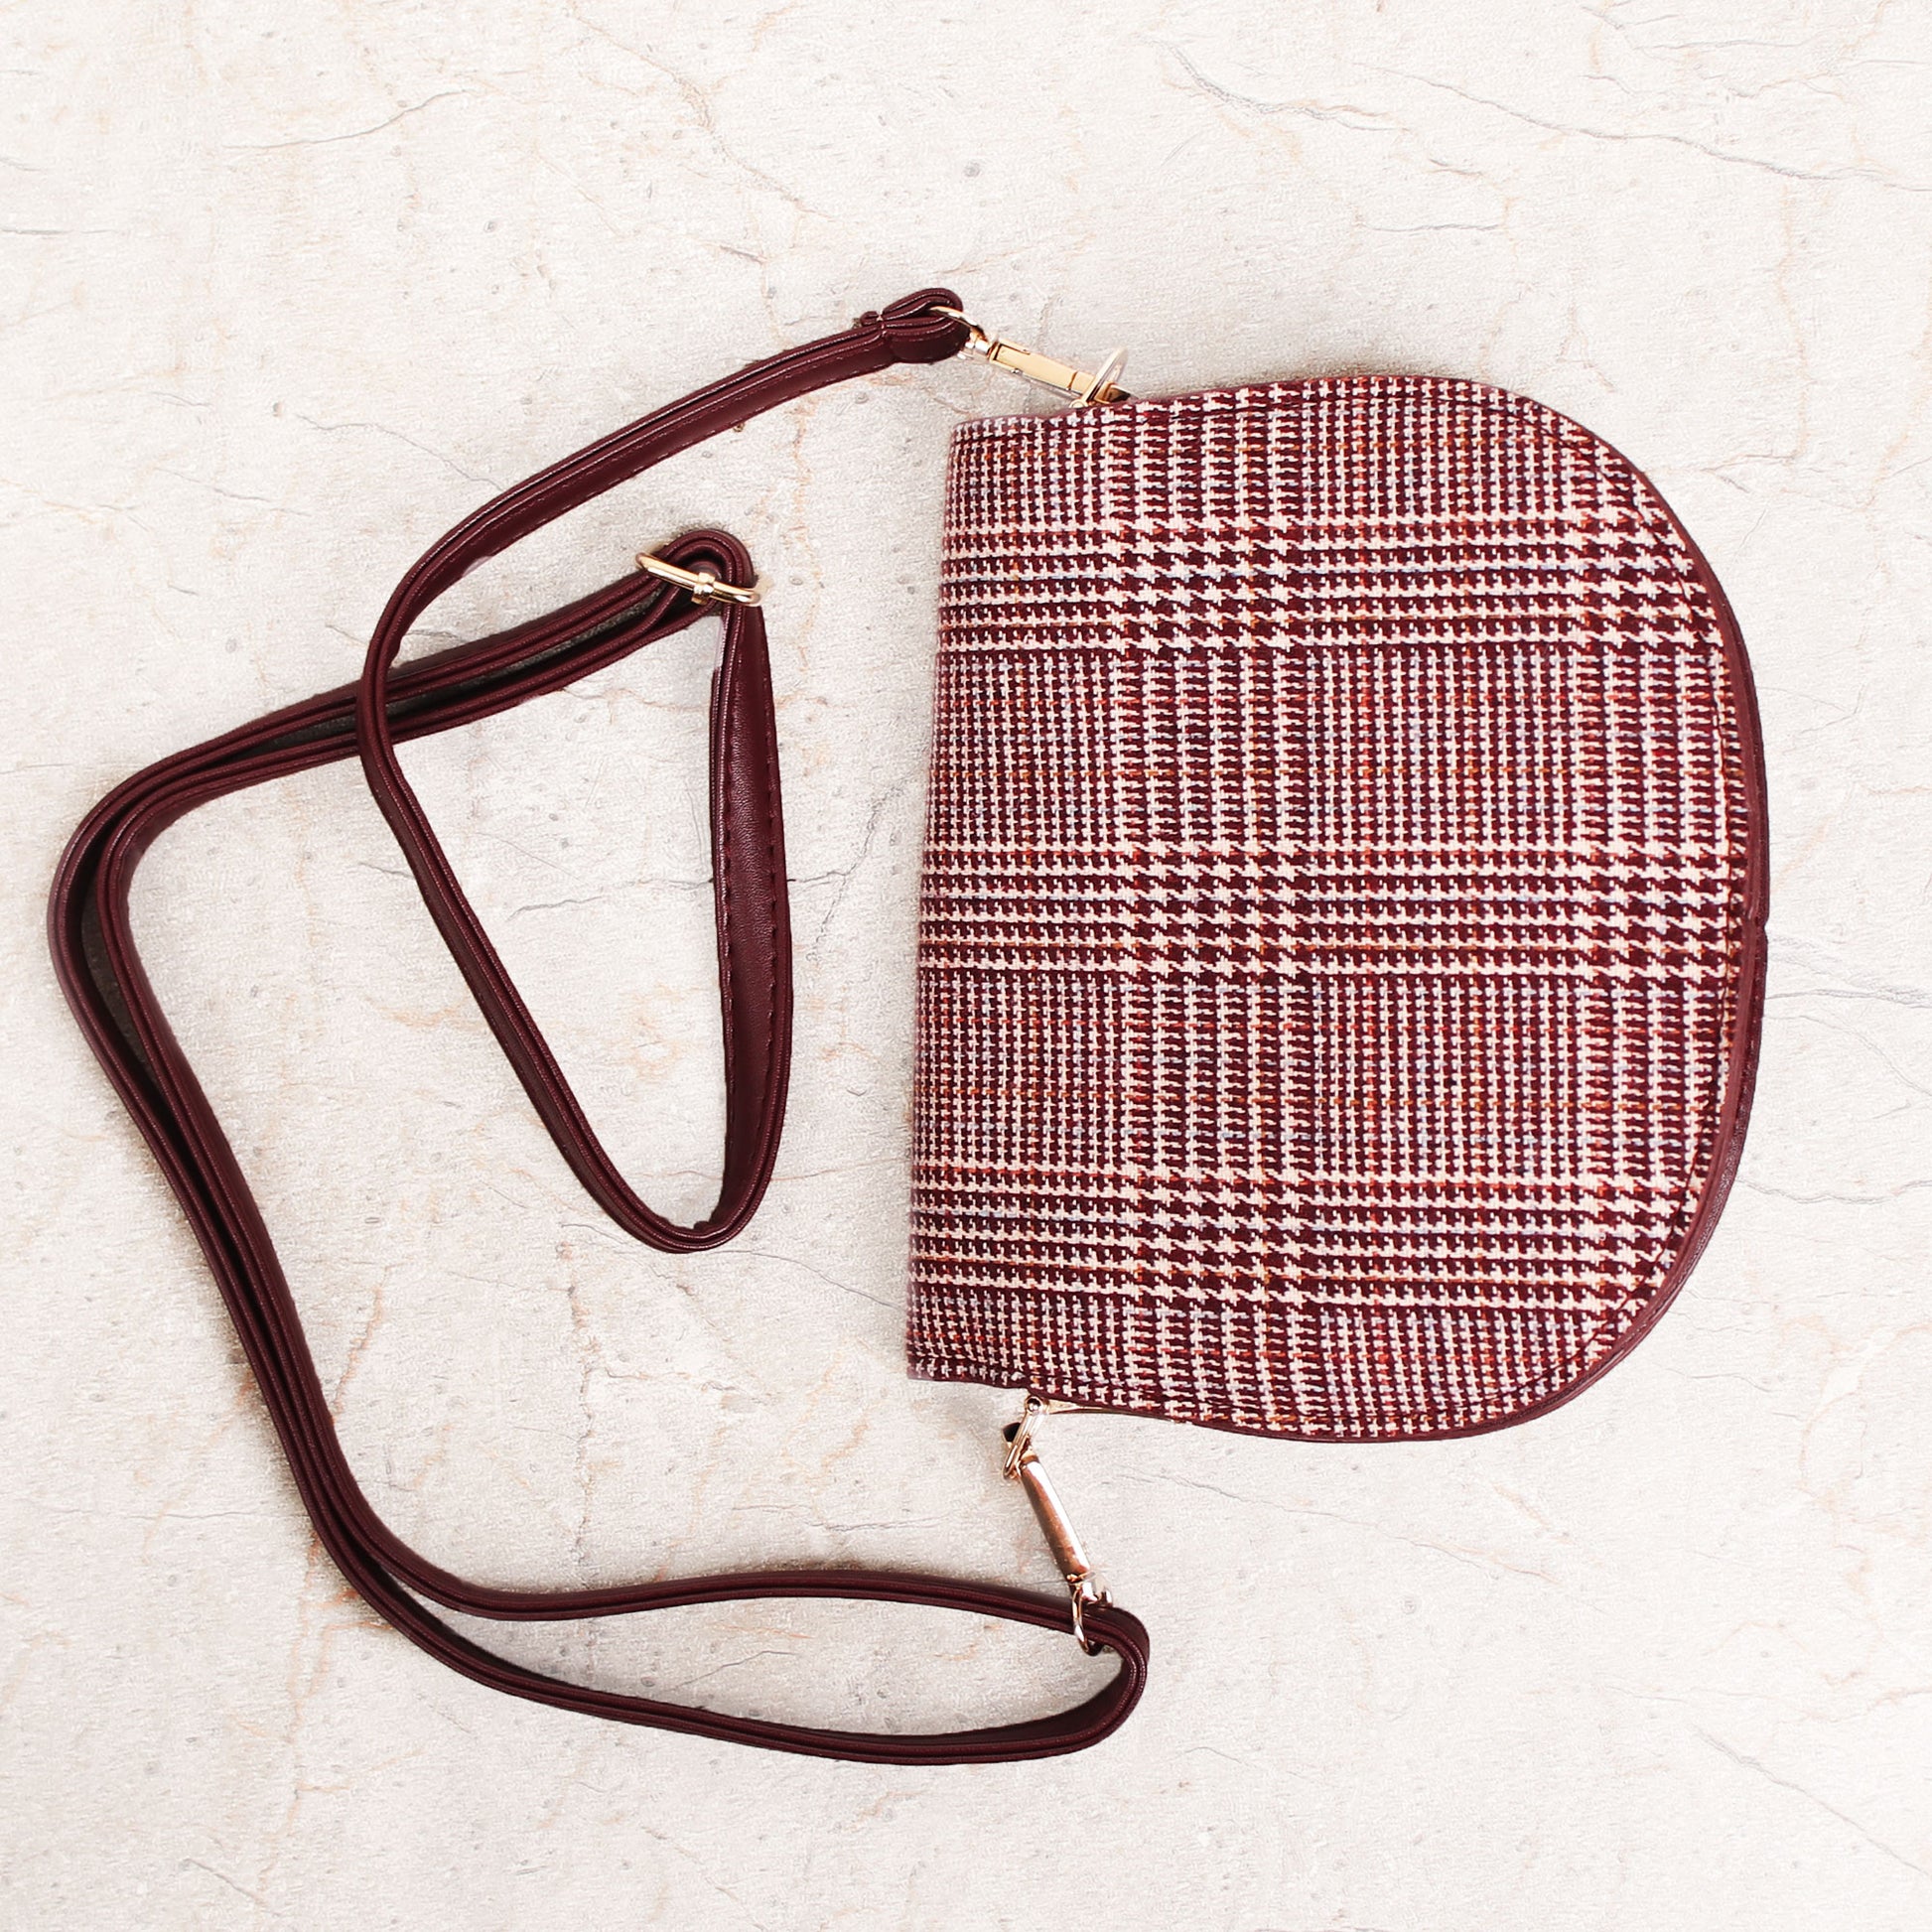 Sling Bag,The Crunchy Checkered Sling Bag - Cippele Multi Store